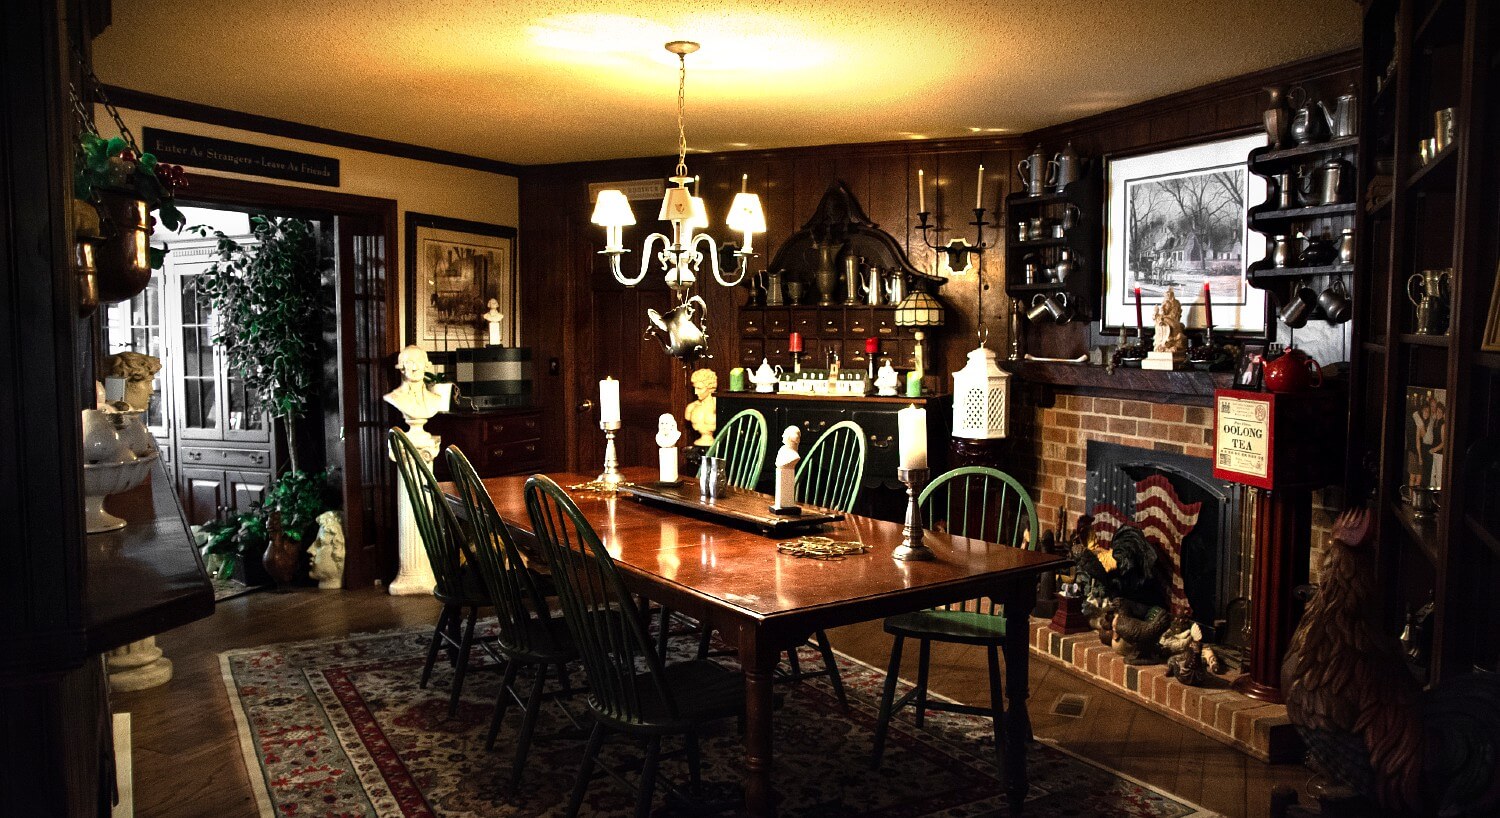 Dining room of a historic home with dark wood features, fireplace and antique decor